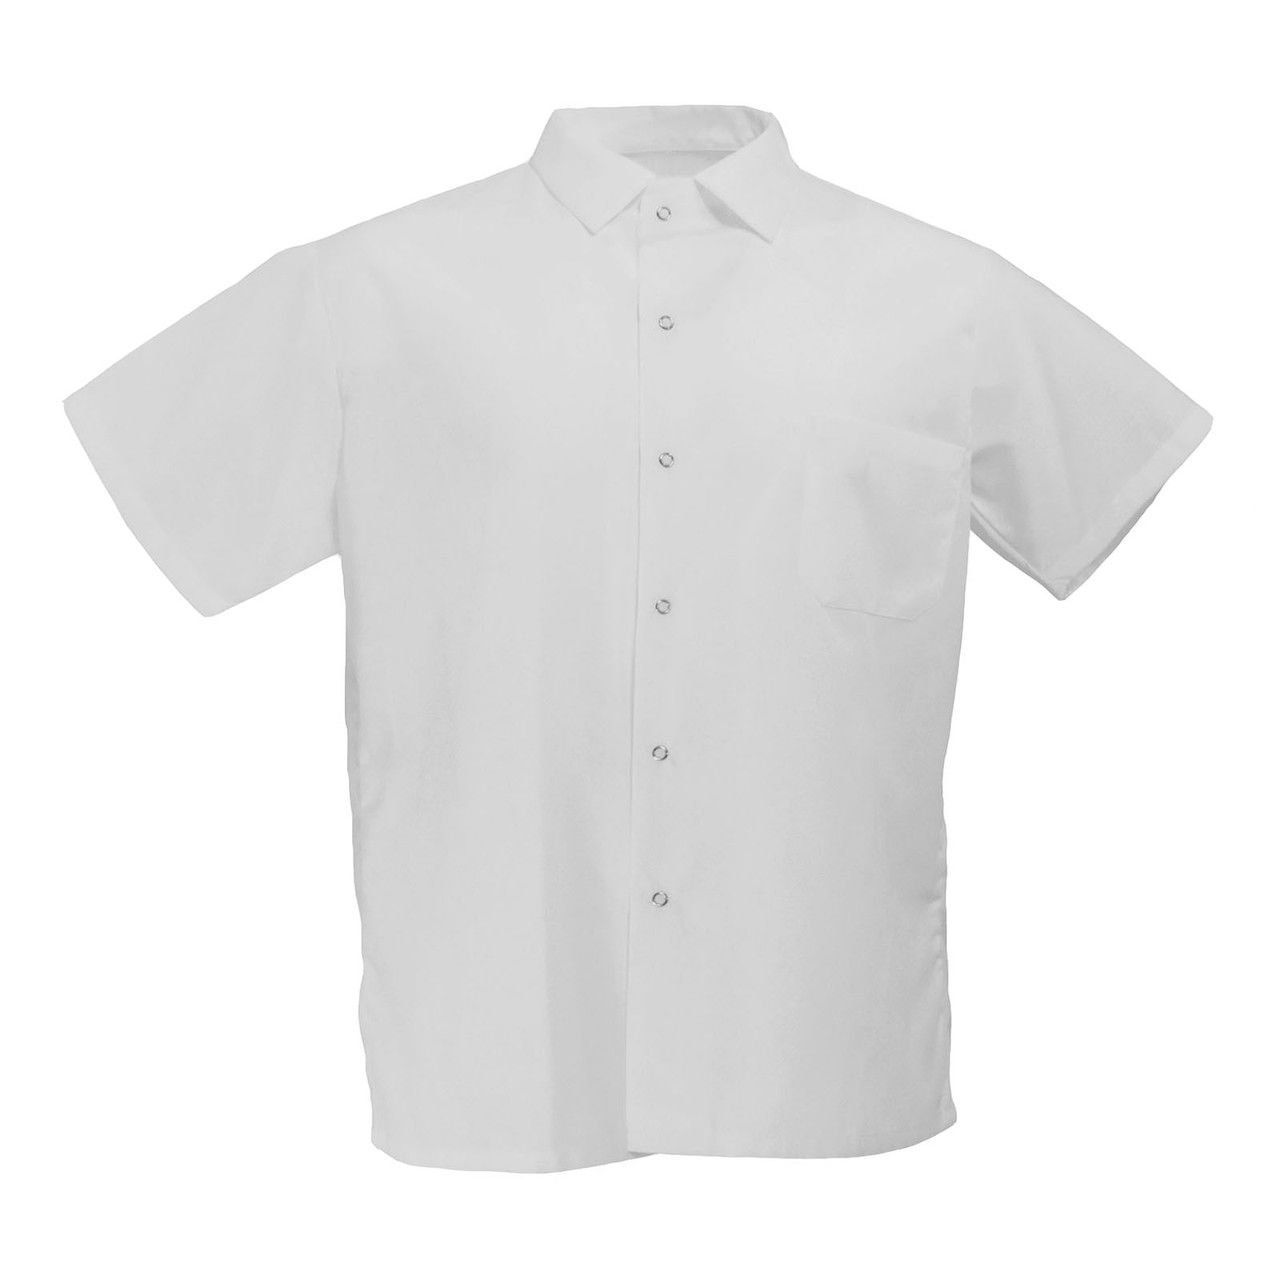 What fabric is the Chef Trend S102 chef white shirts made from?